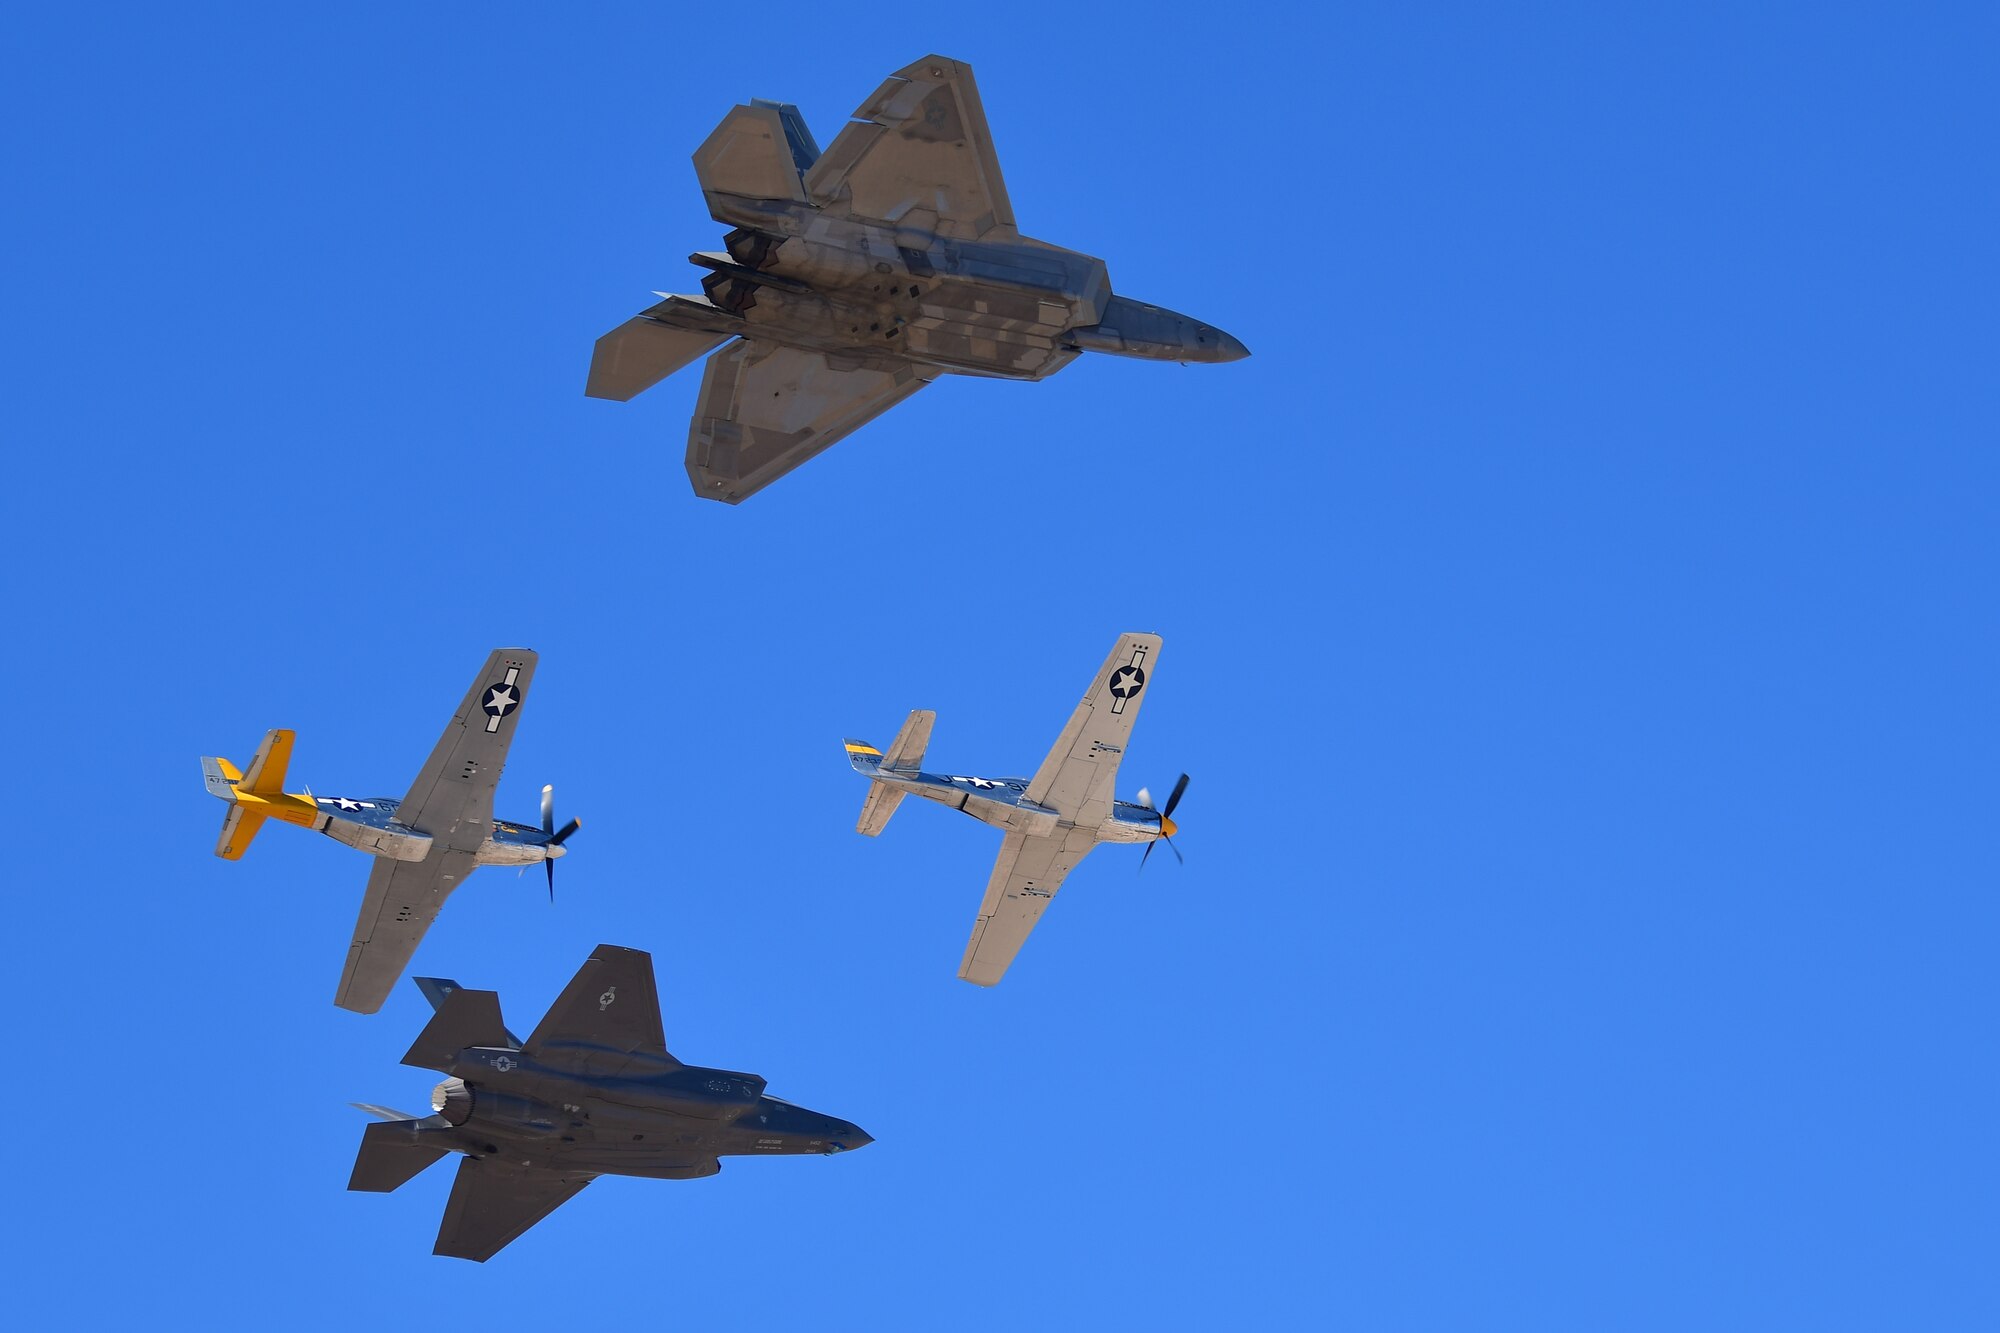 Four planes flying in formation.